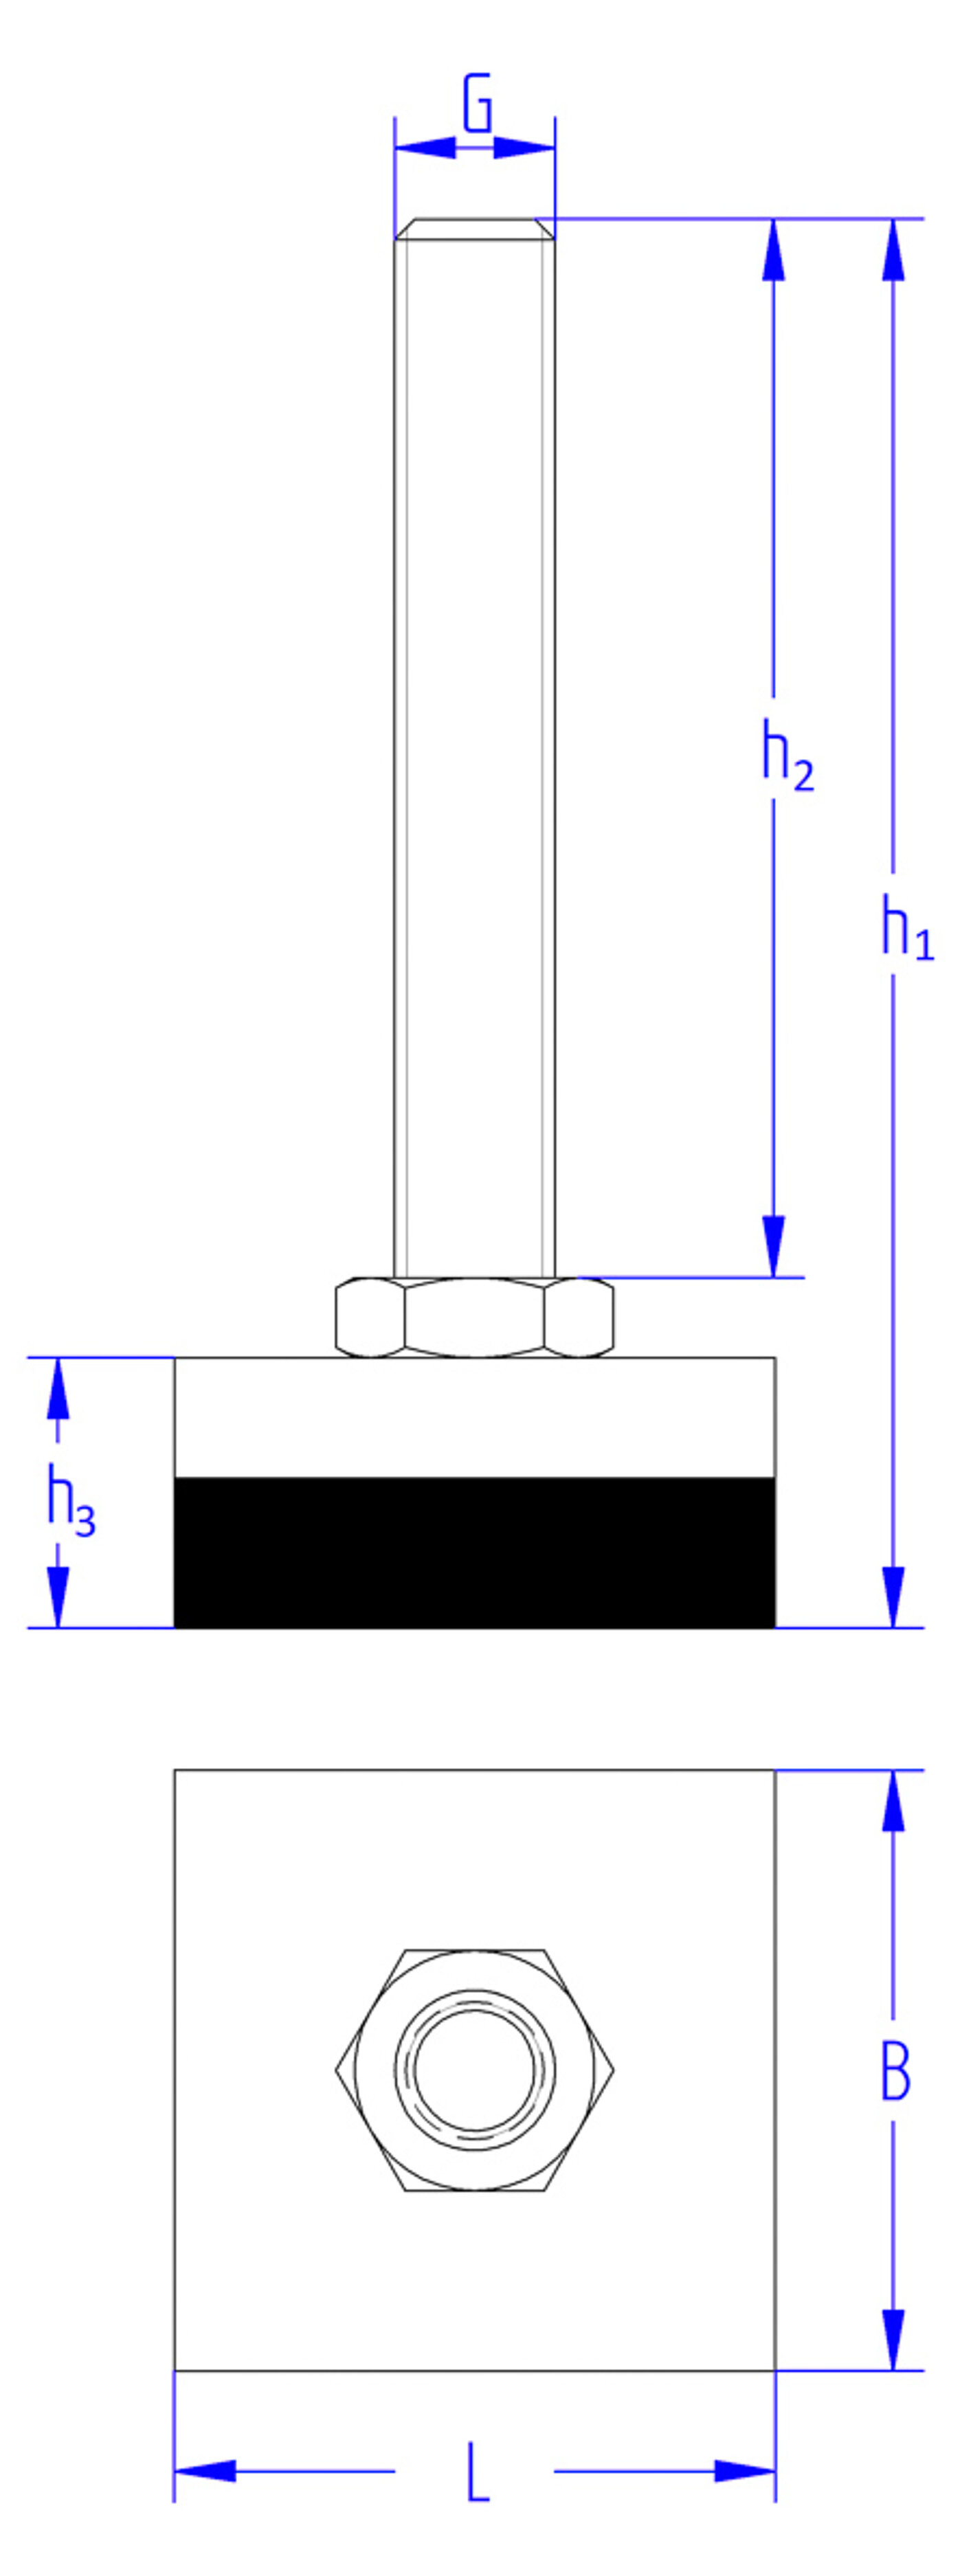 schematic drawing of a square machine foot made of a steel plate with elastomer at the bottom for vibration dampening and a fixed, non-pendulum thread on top, fastened by a flat hexagonal nut, in the side view and in the view from the top